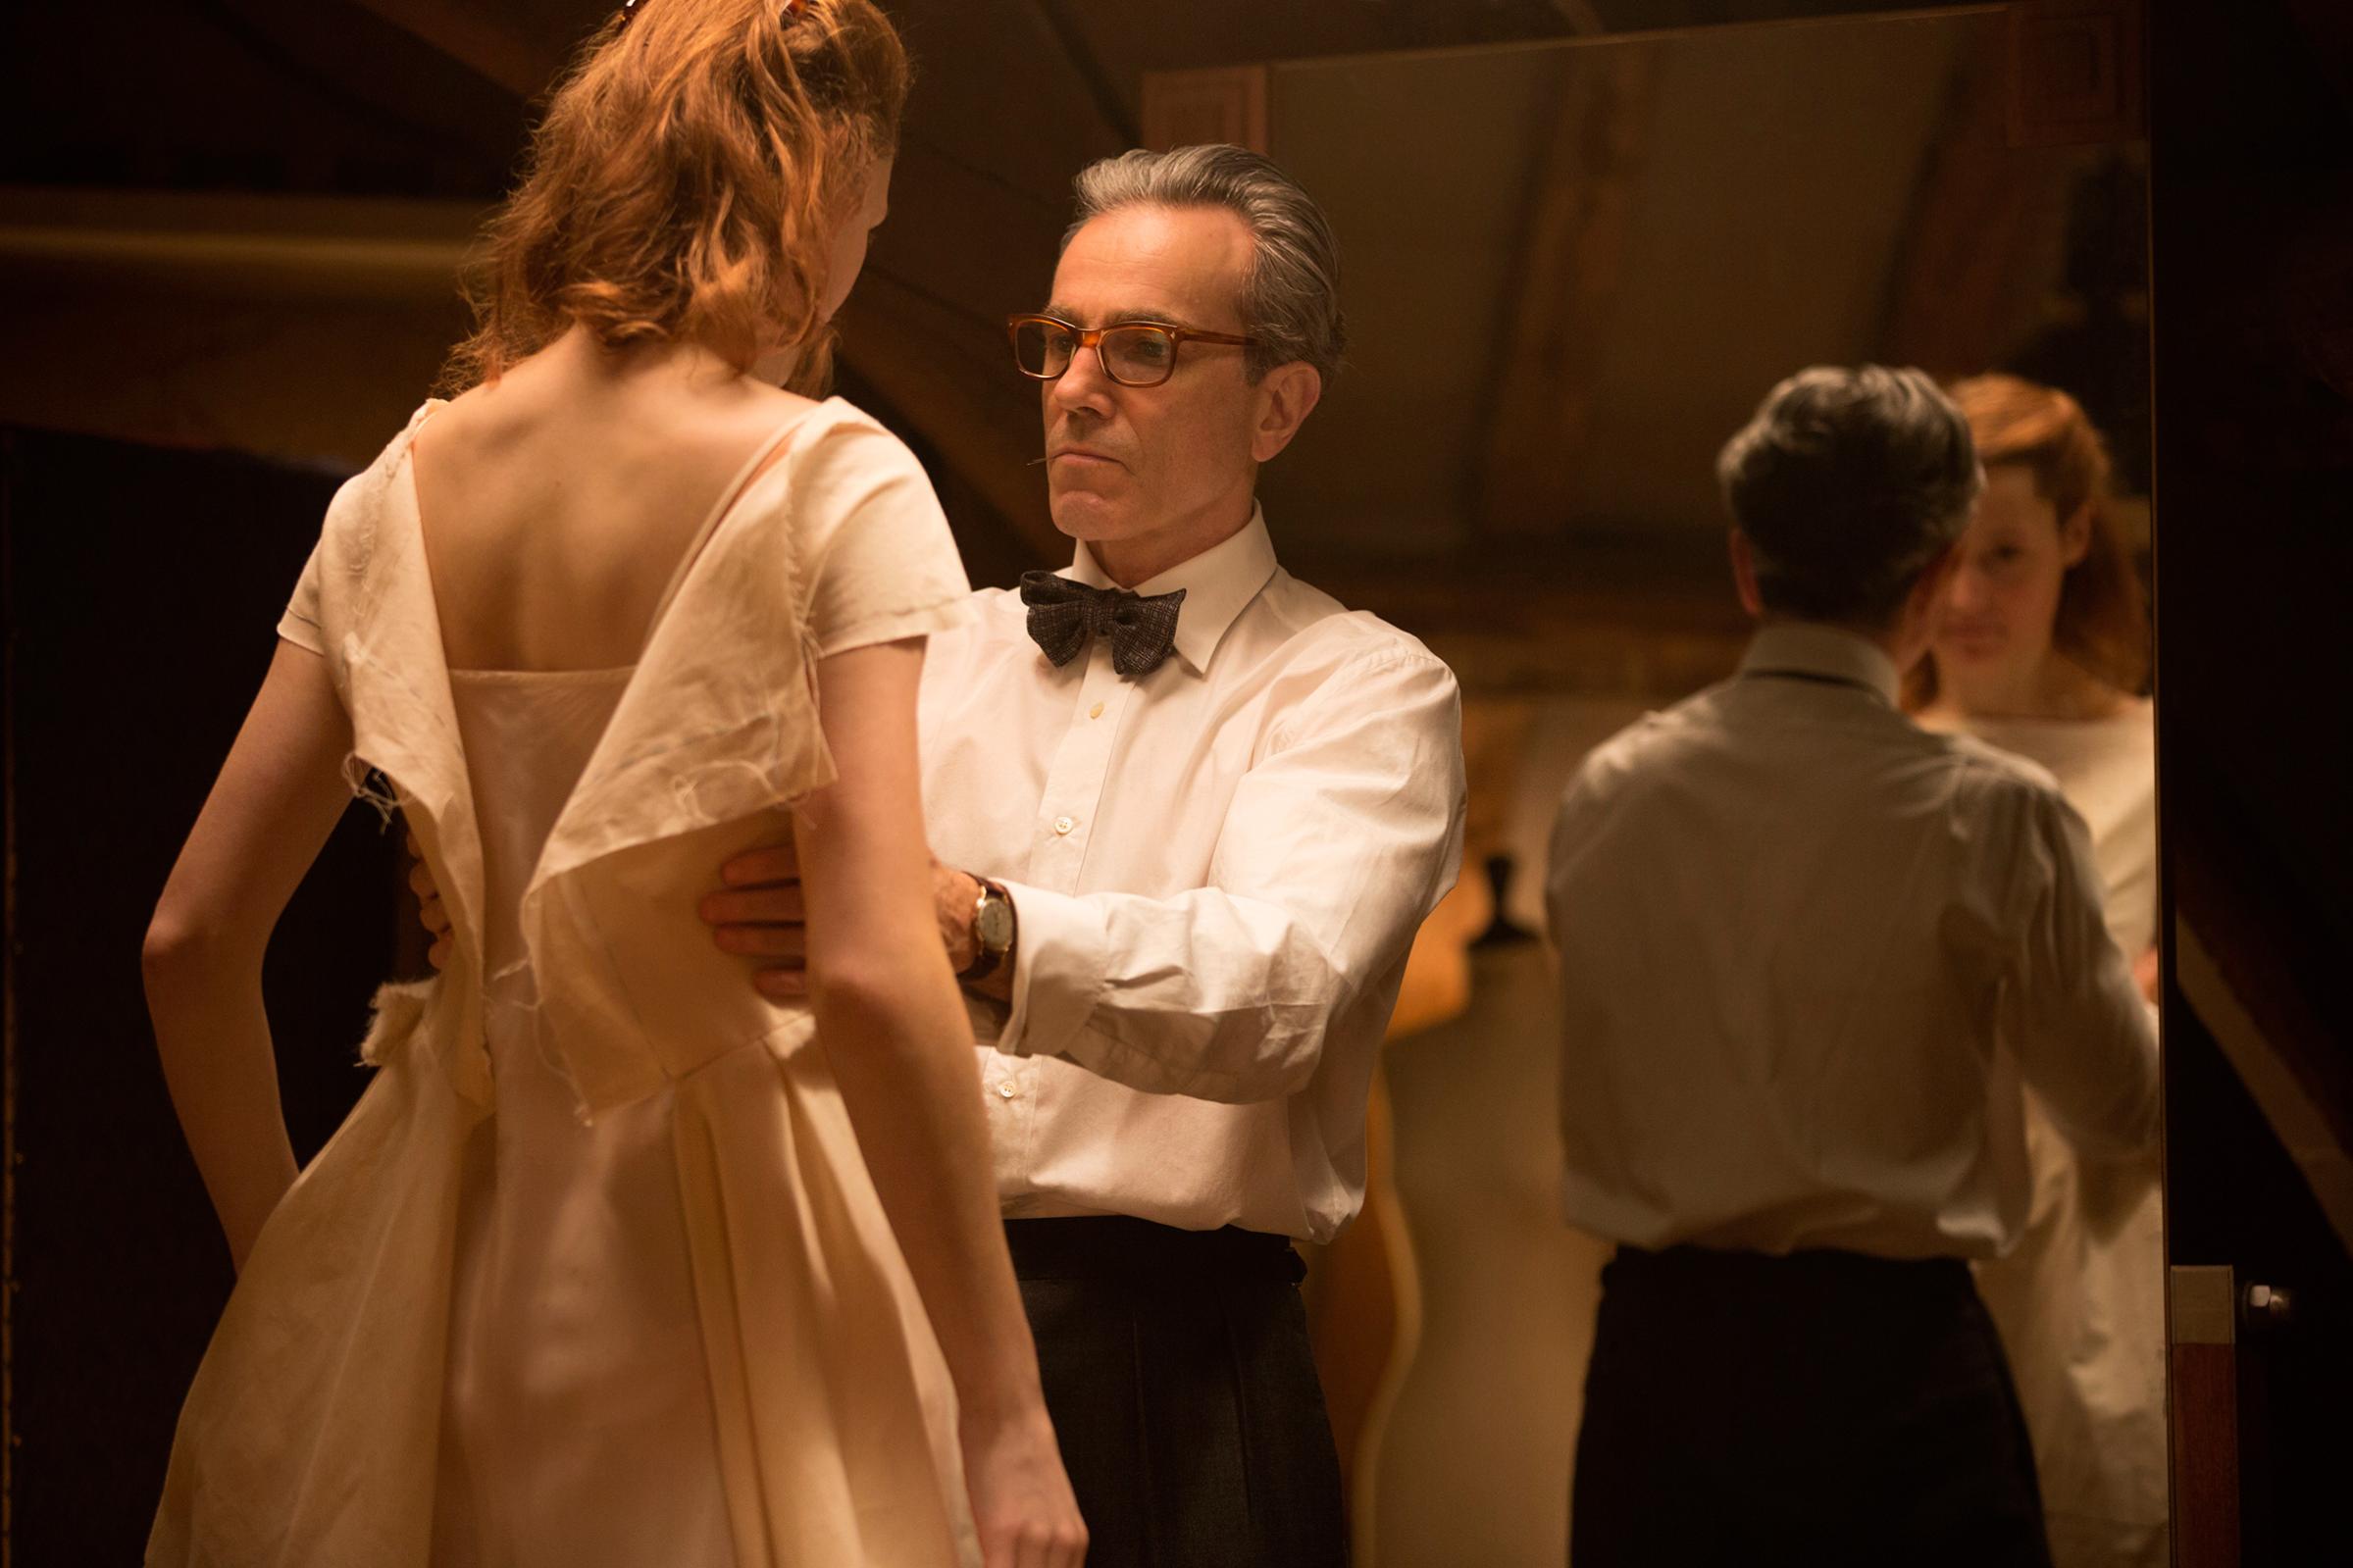 In Phantom Thread, Day-Lewis plays a 1950s couturier reminiscent of storied designer Charles James